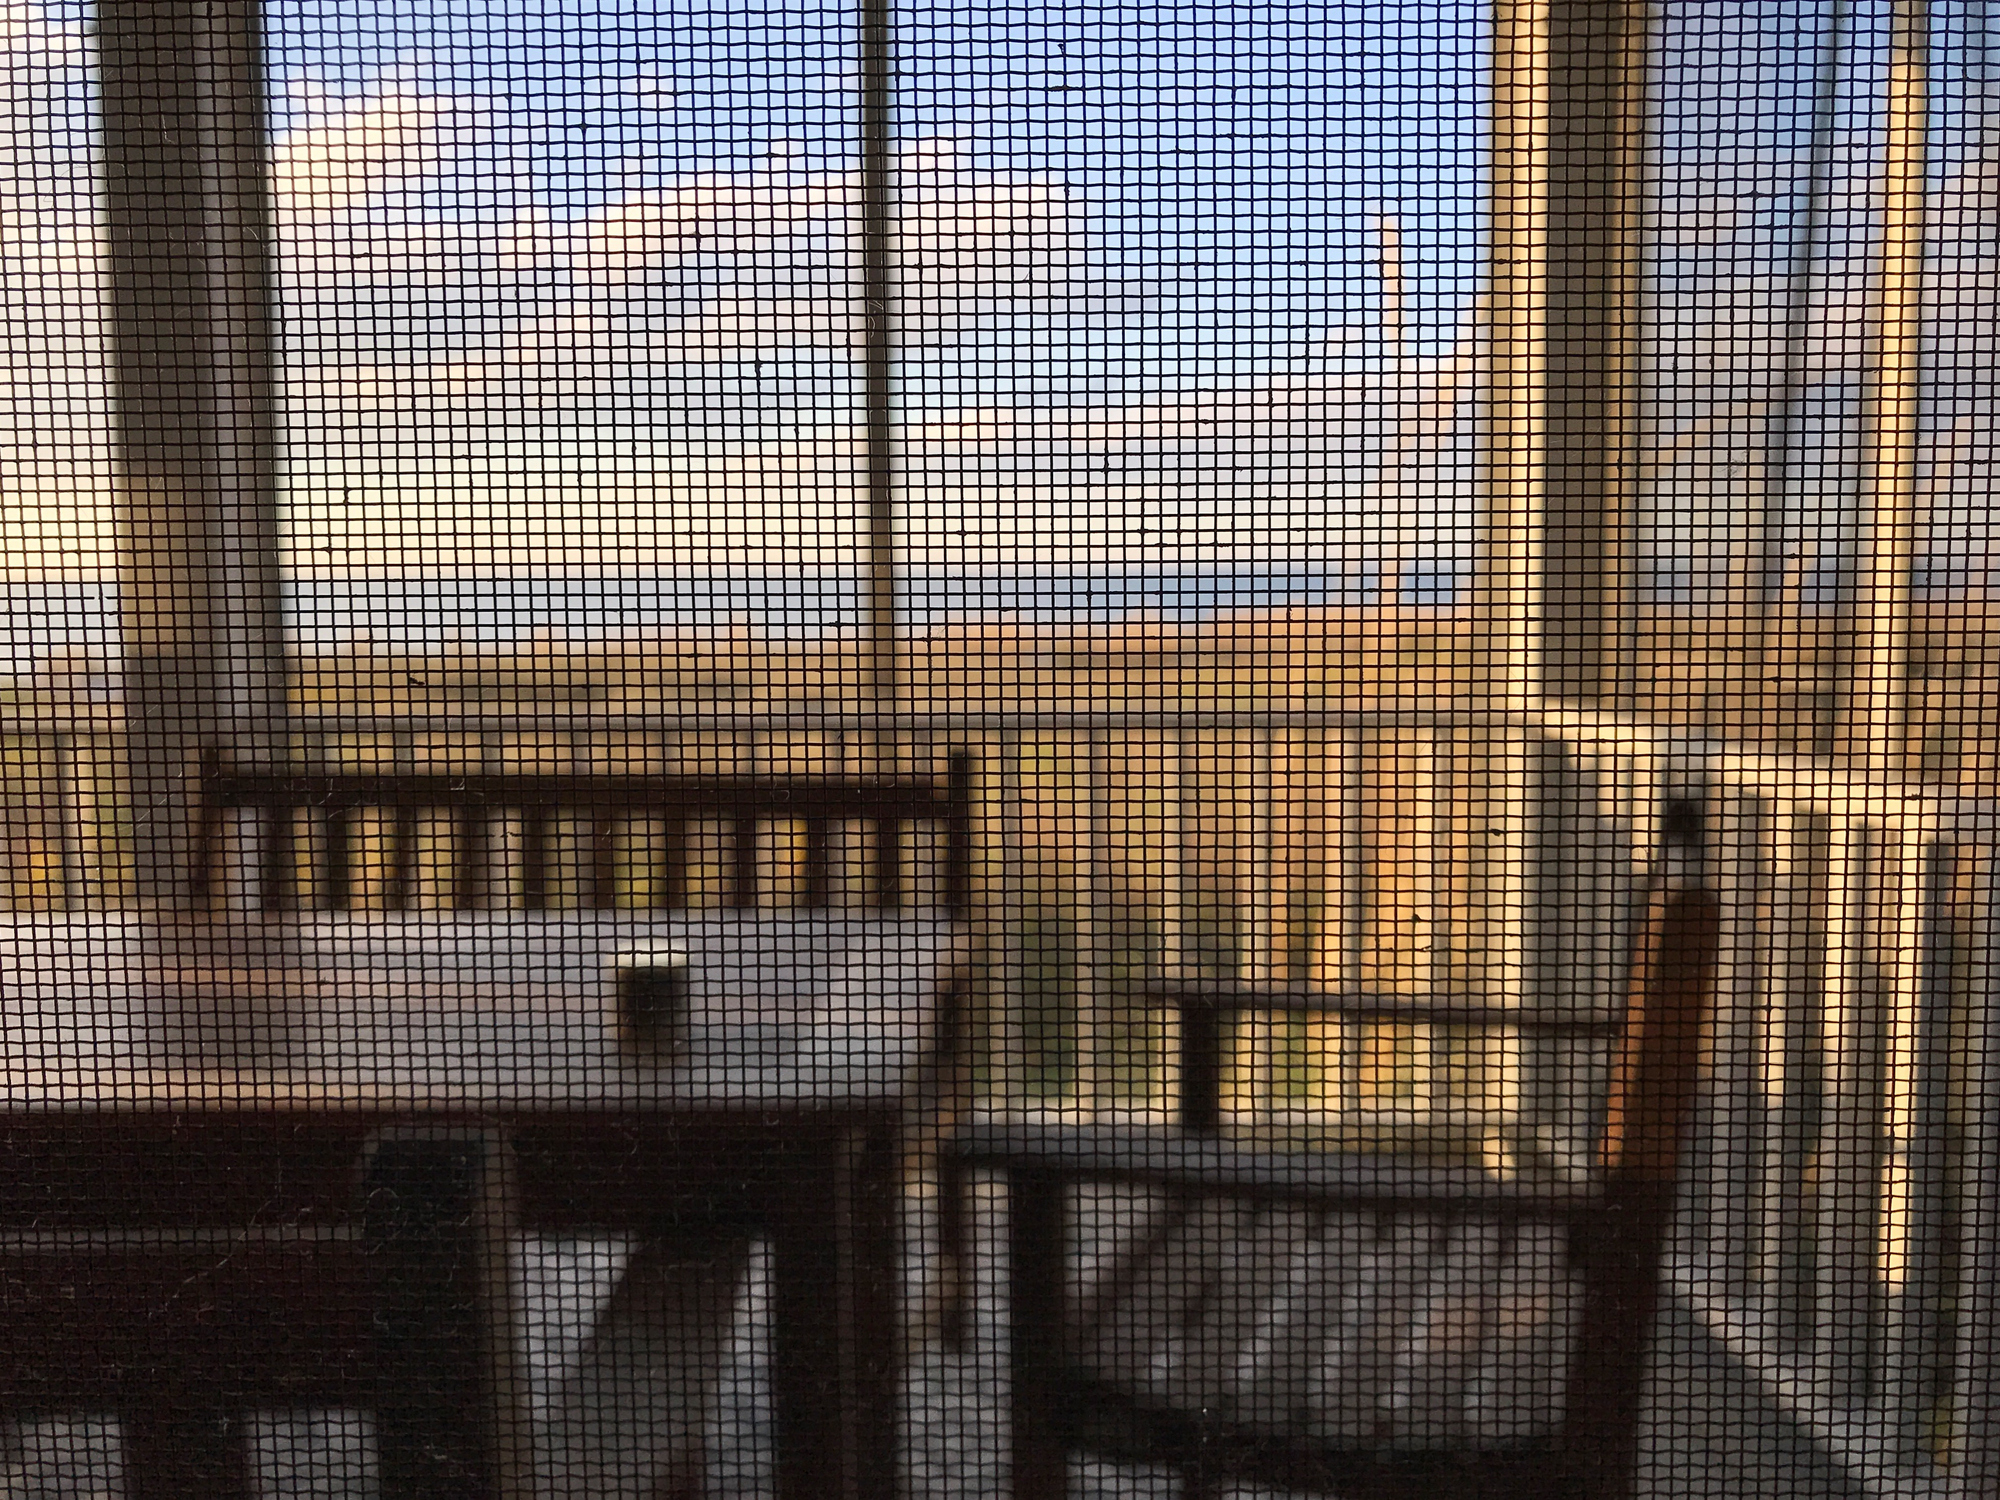 View of an outdoor seating area with wooden furniture, seen through a mesh screen, overlooking a scenic landscape. No people are in the image